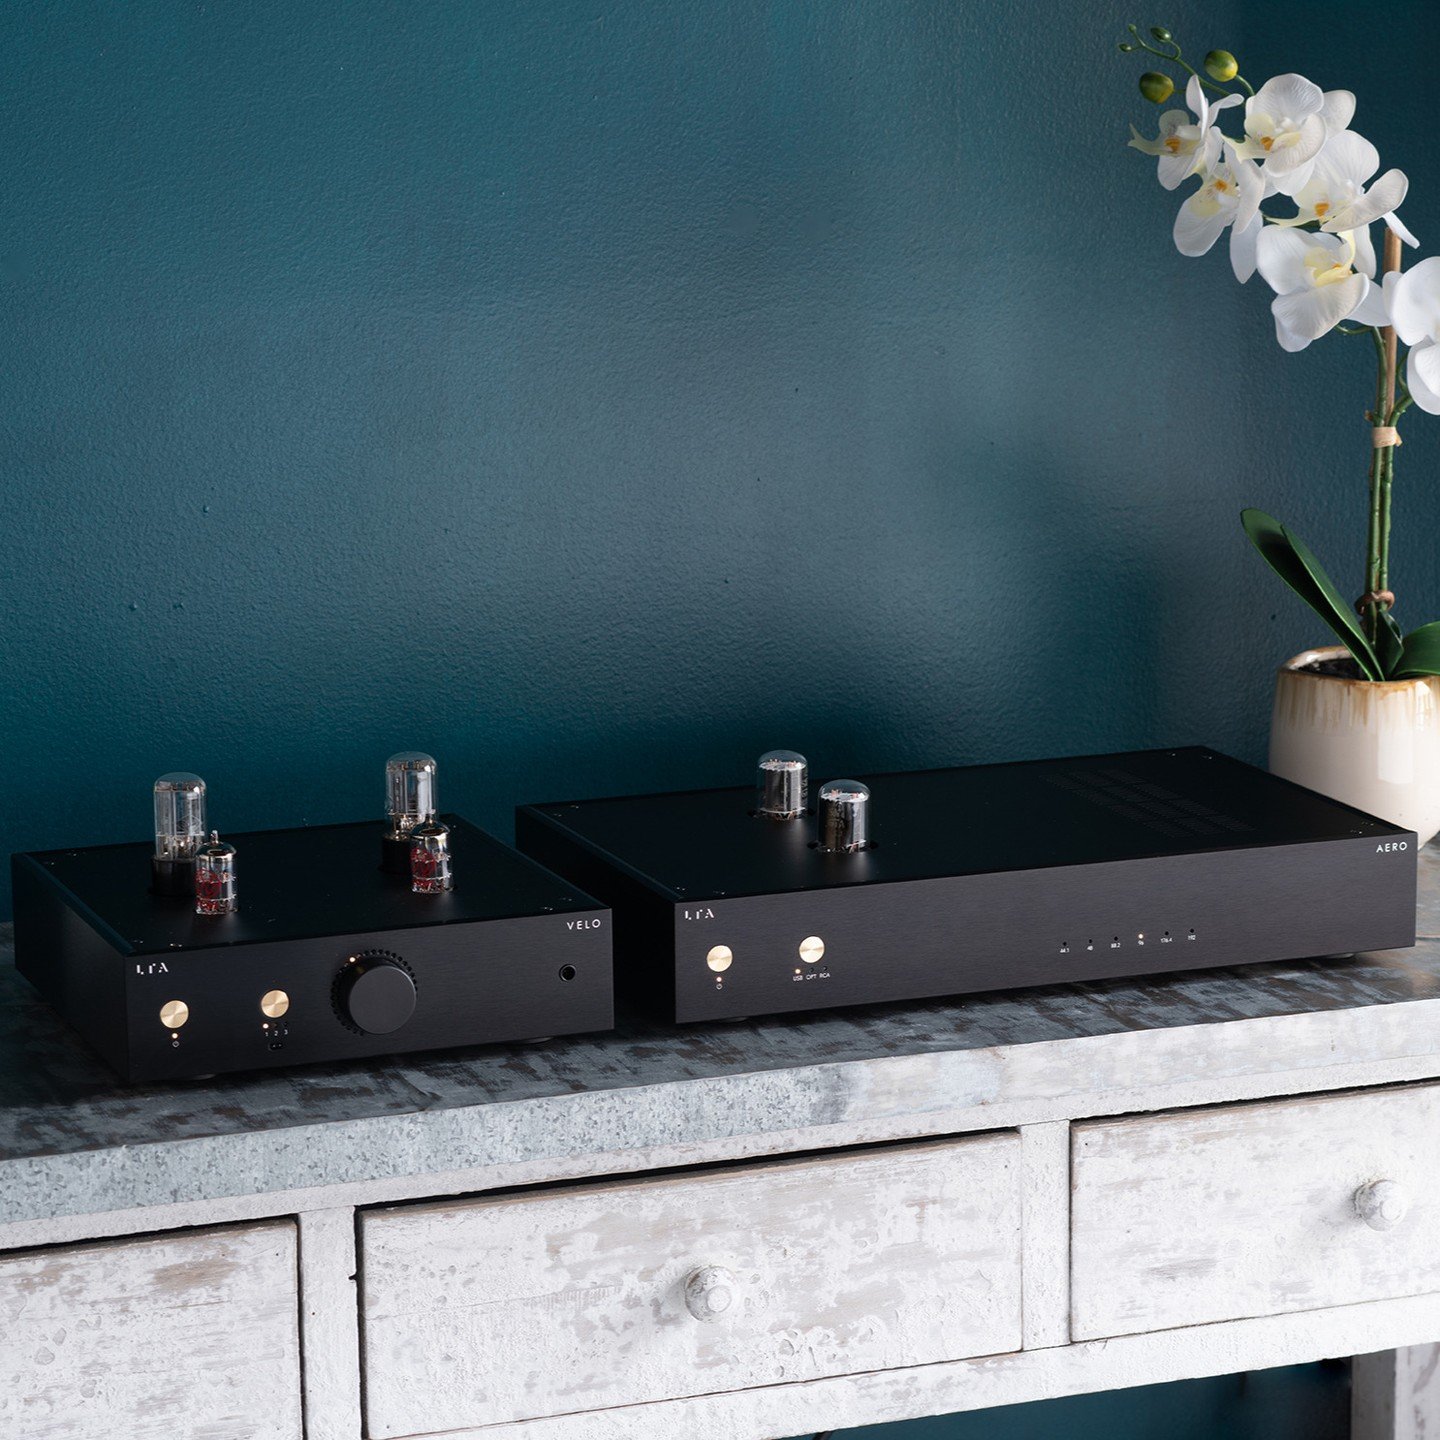 We are very happy to announce that we are entering into full production on LTA's newest products:

Velo headphone amp / preamp
Aero DAC

As you can see, the Velo and Aero make one spectacular looking system. They sound even better together. 😇

Click